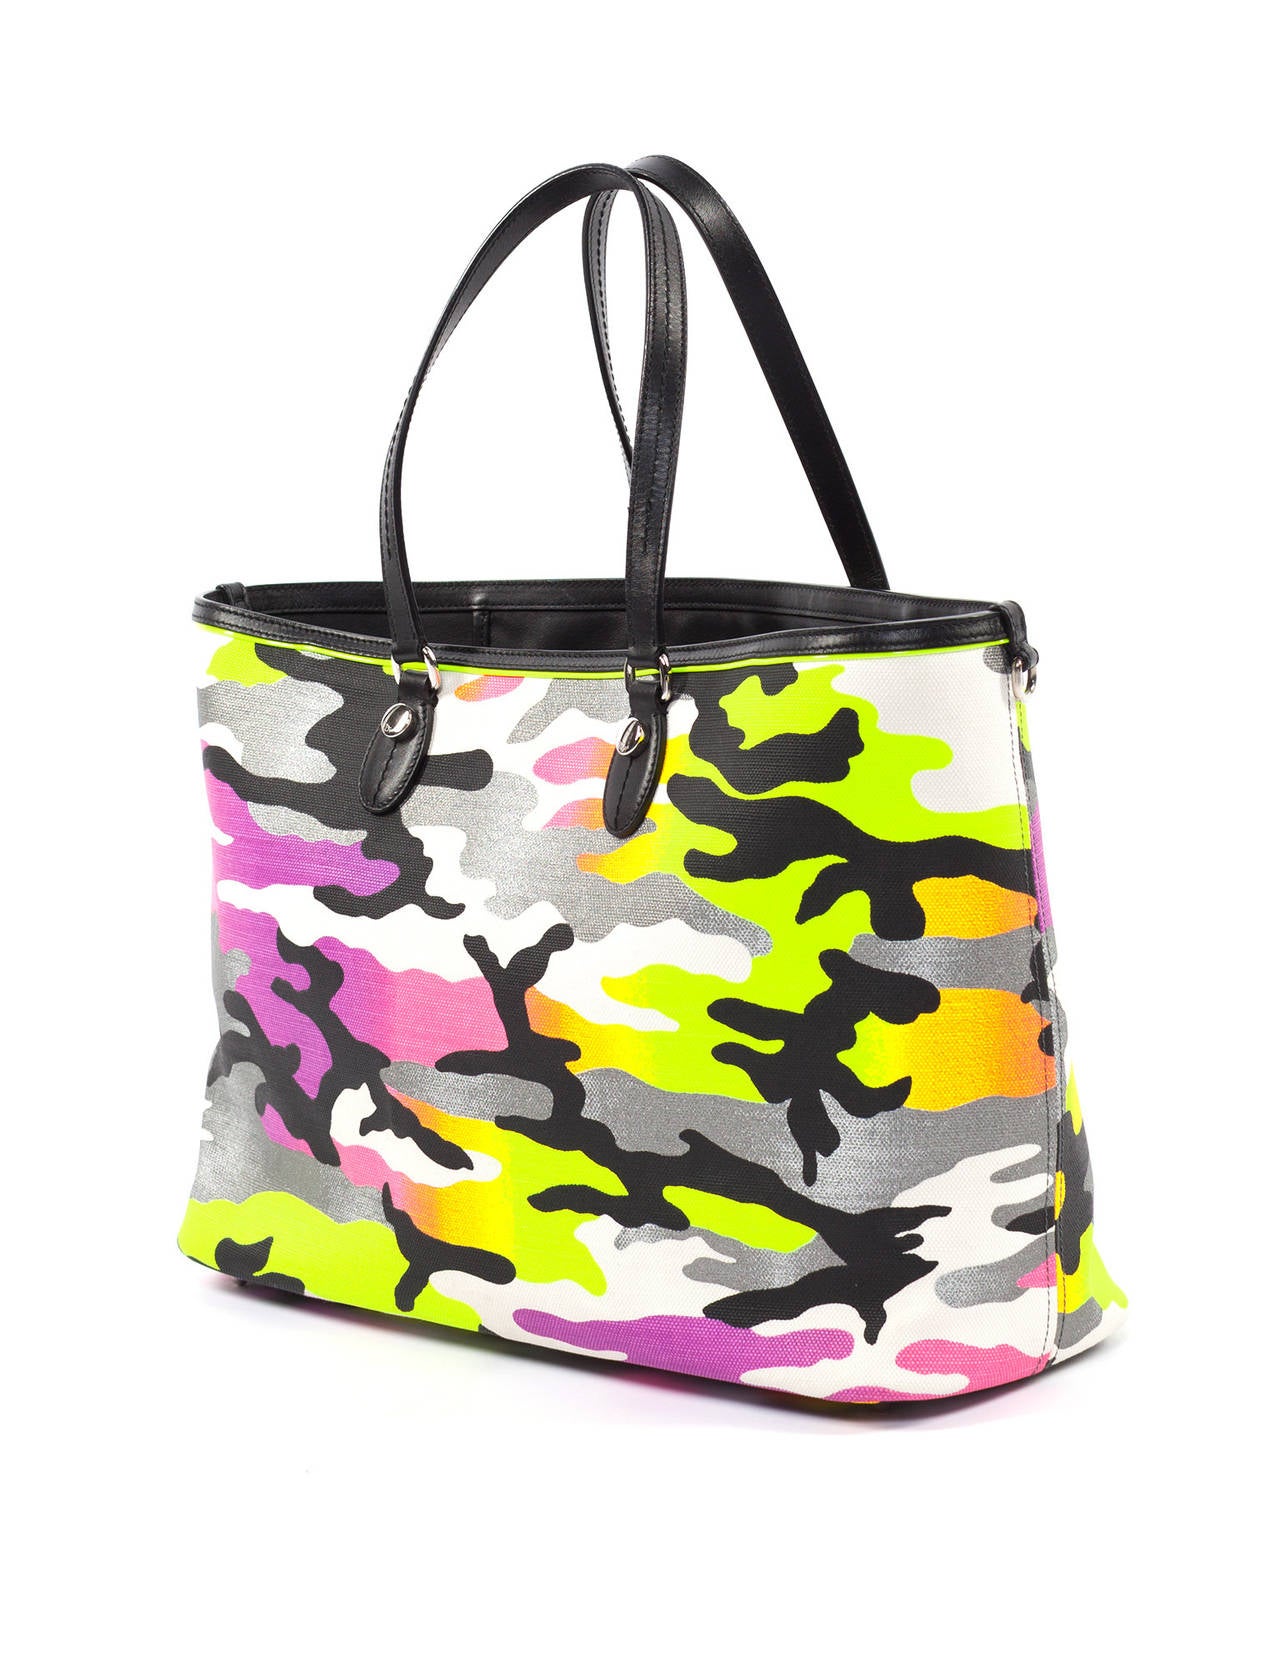 Beige Dior X Anselm Rhyle Neon Camouflage large tote bag from SS 2012